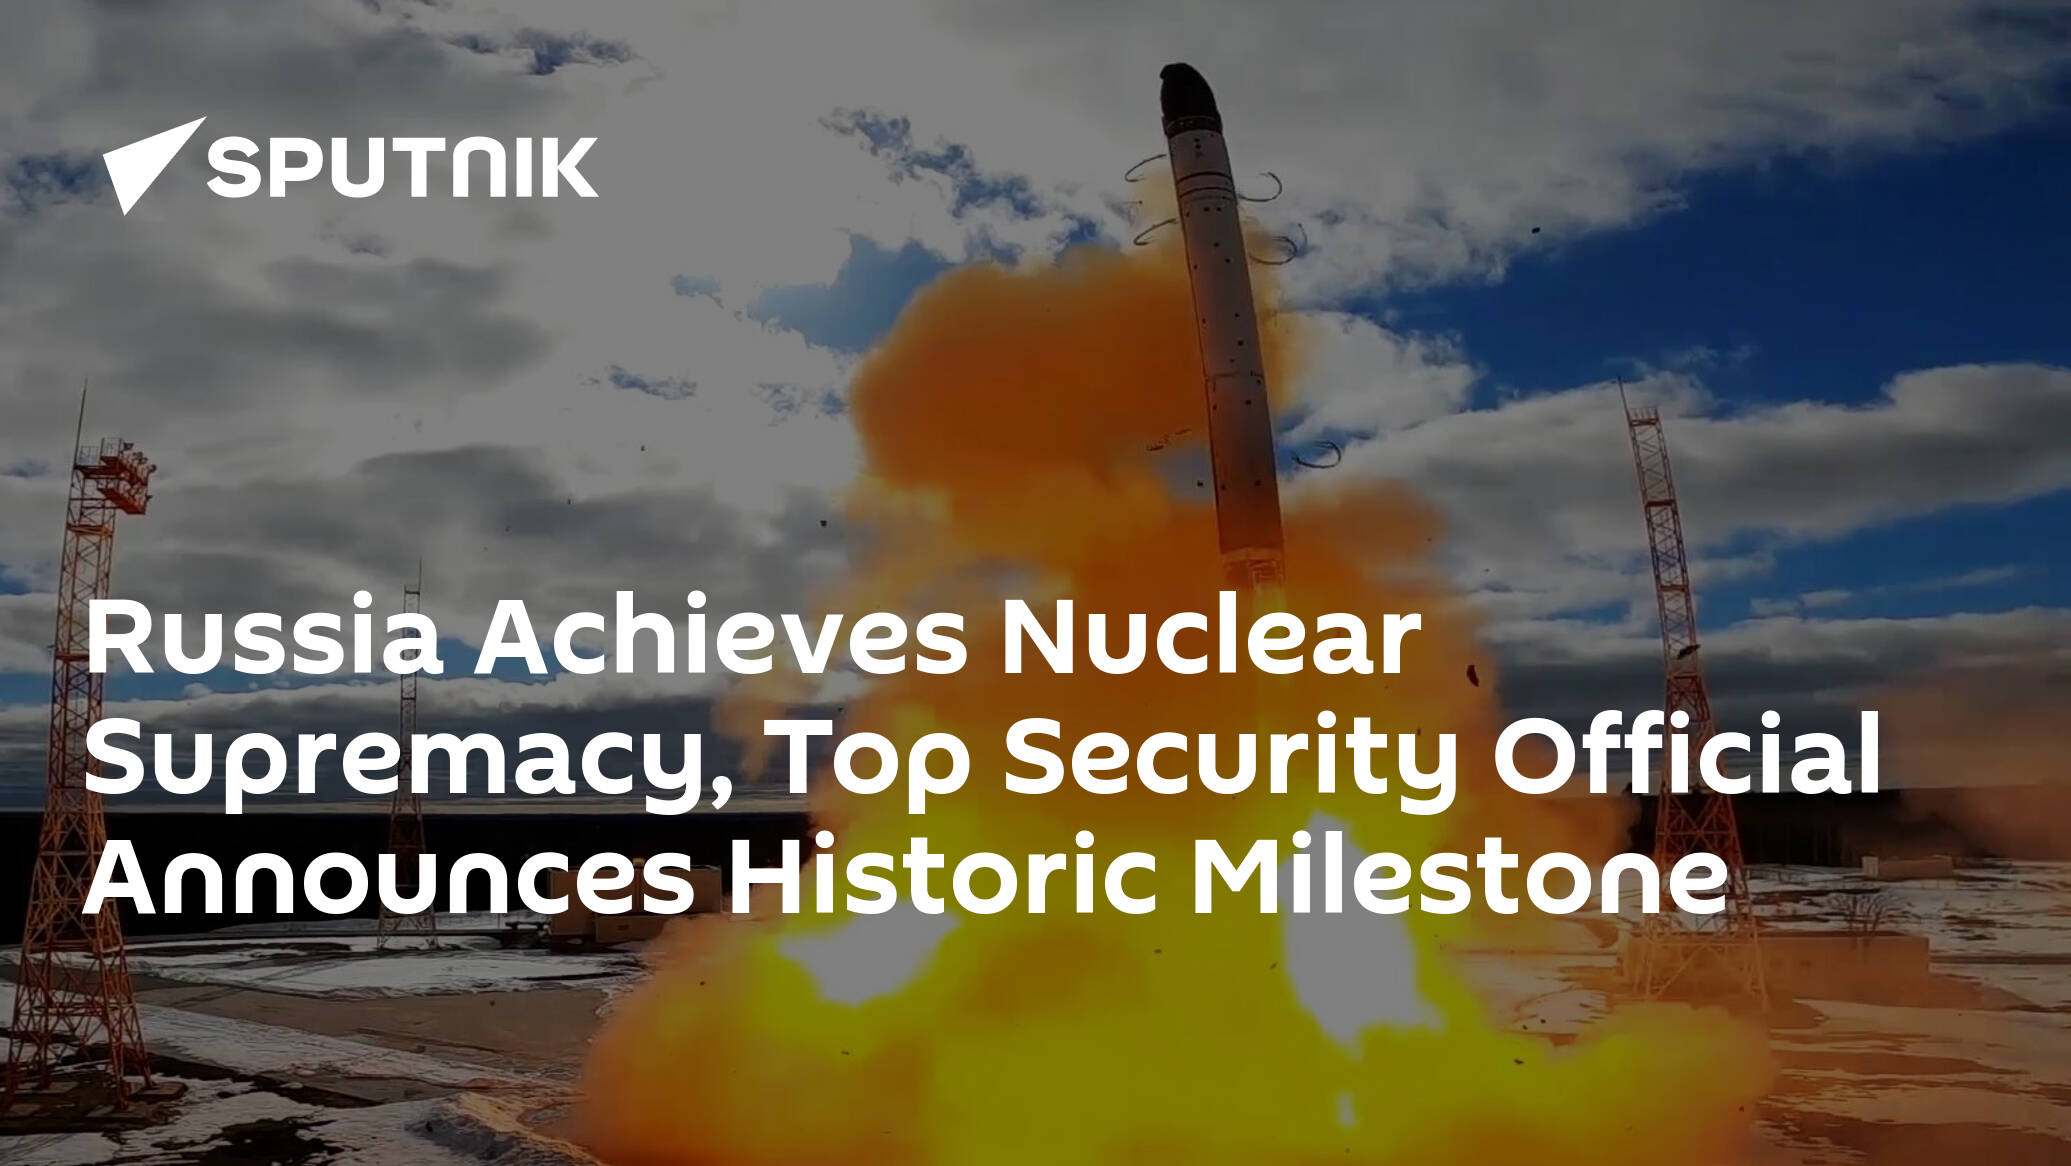 Russia Achieves Nuclear Supremacy, Top Security Official Announces Historic Milestone